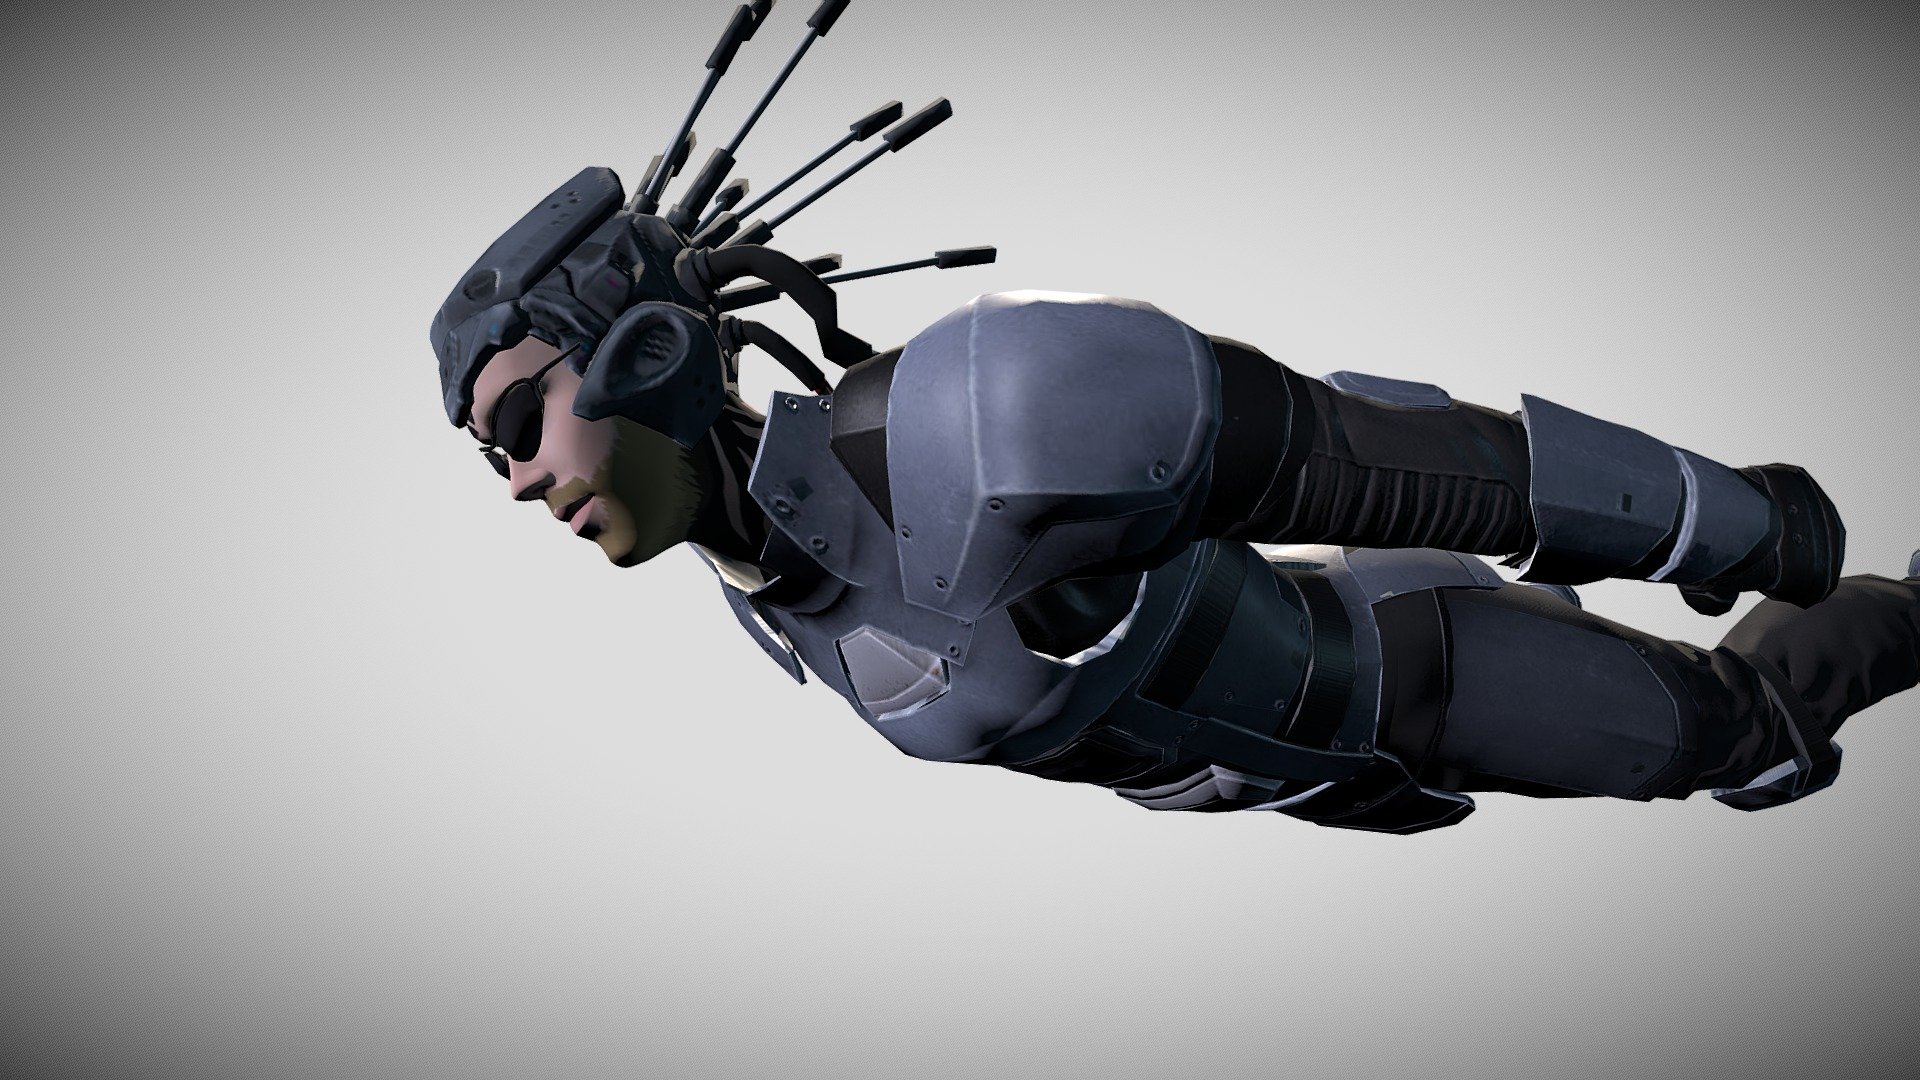 He's cool, he's a hero, and he has spikes sticking out the back of his head.

Spike was created in Ready Player Me, Tweaked in Blender and rigged and animated in Mixamo 3d model